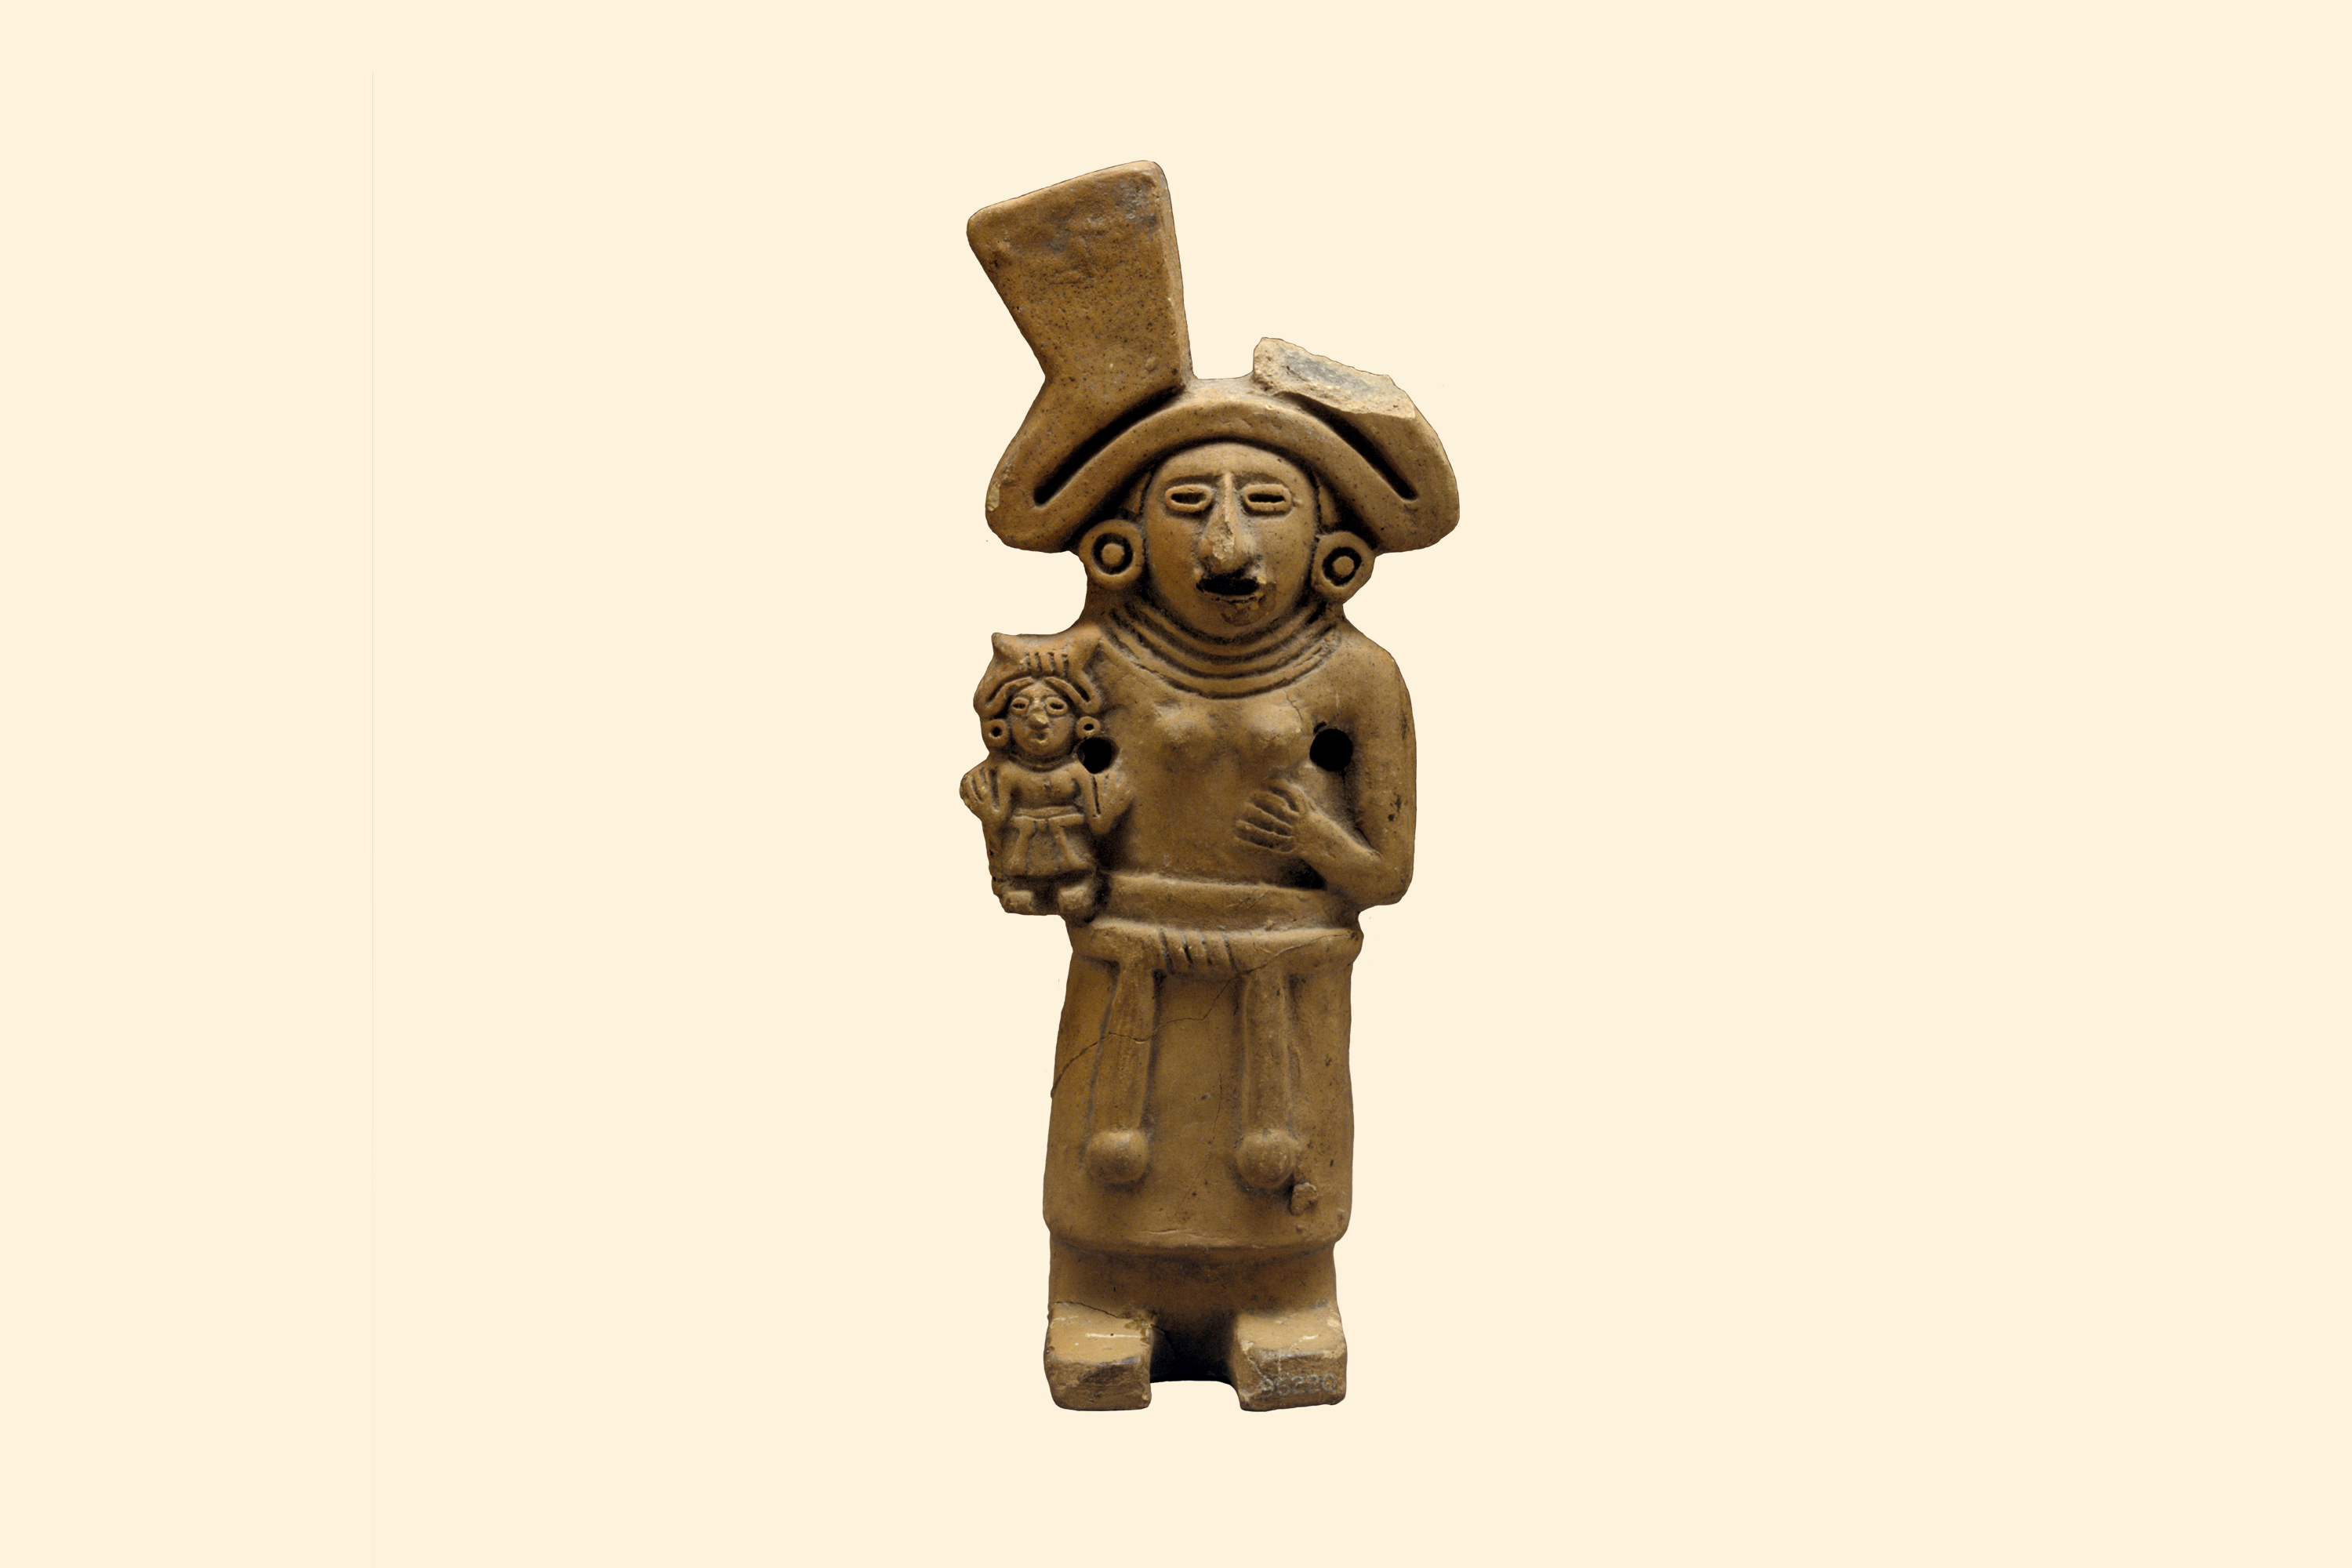 Public markets were centers of Aztec life, offering necessities like food and dishes. Common items like this rattle were associated with fertility and childbirth.